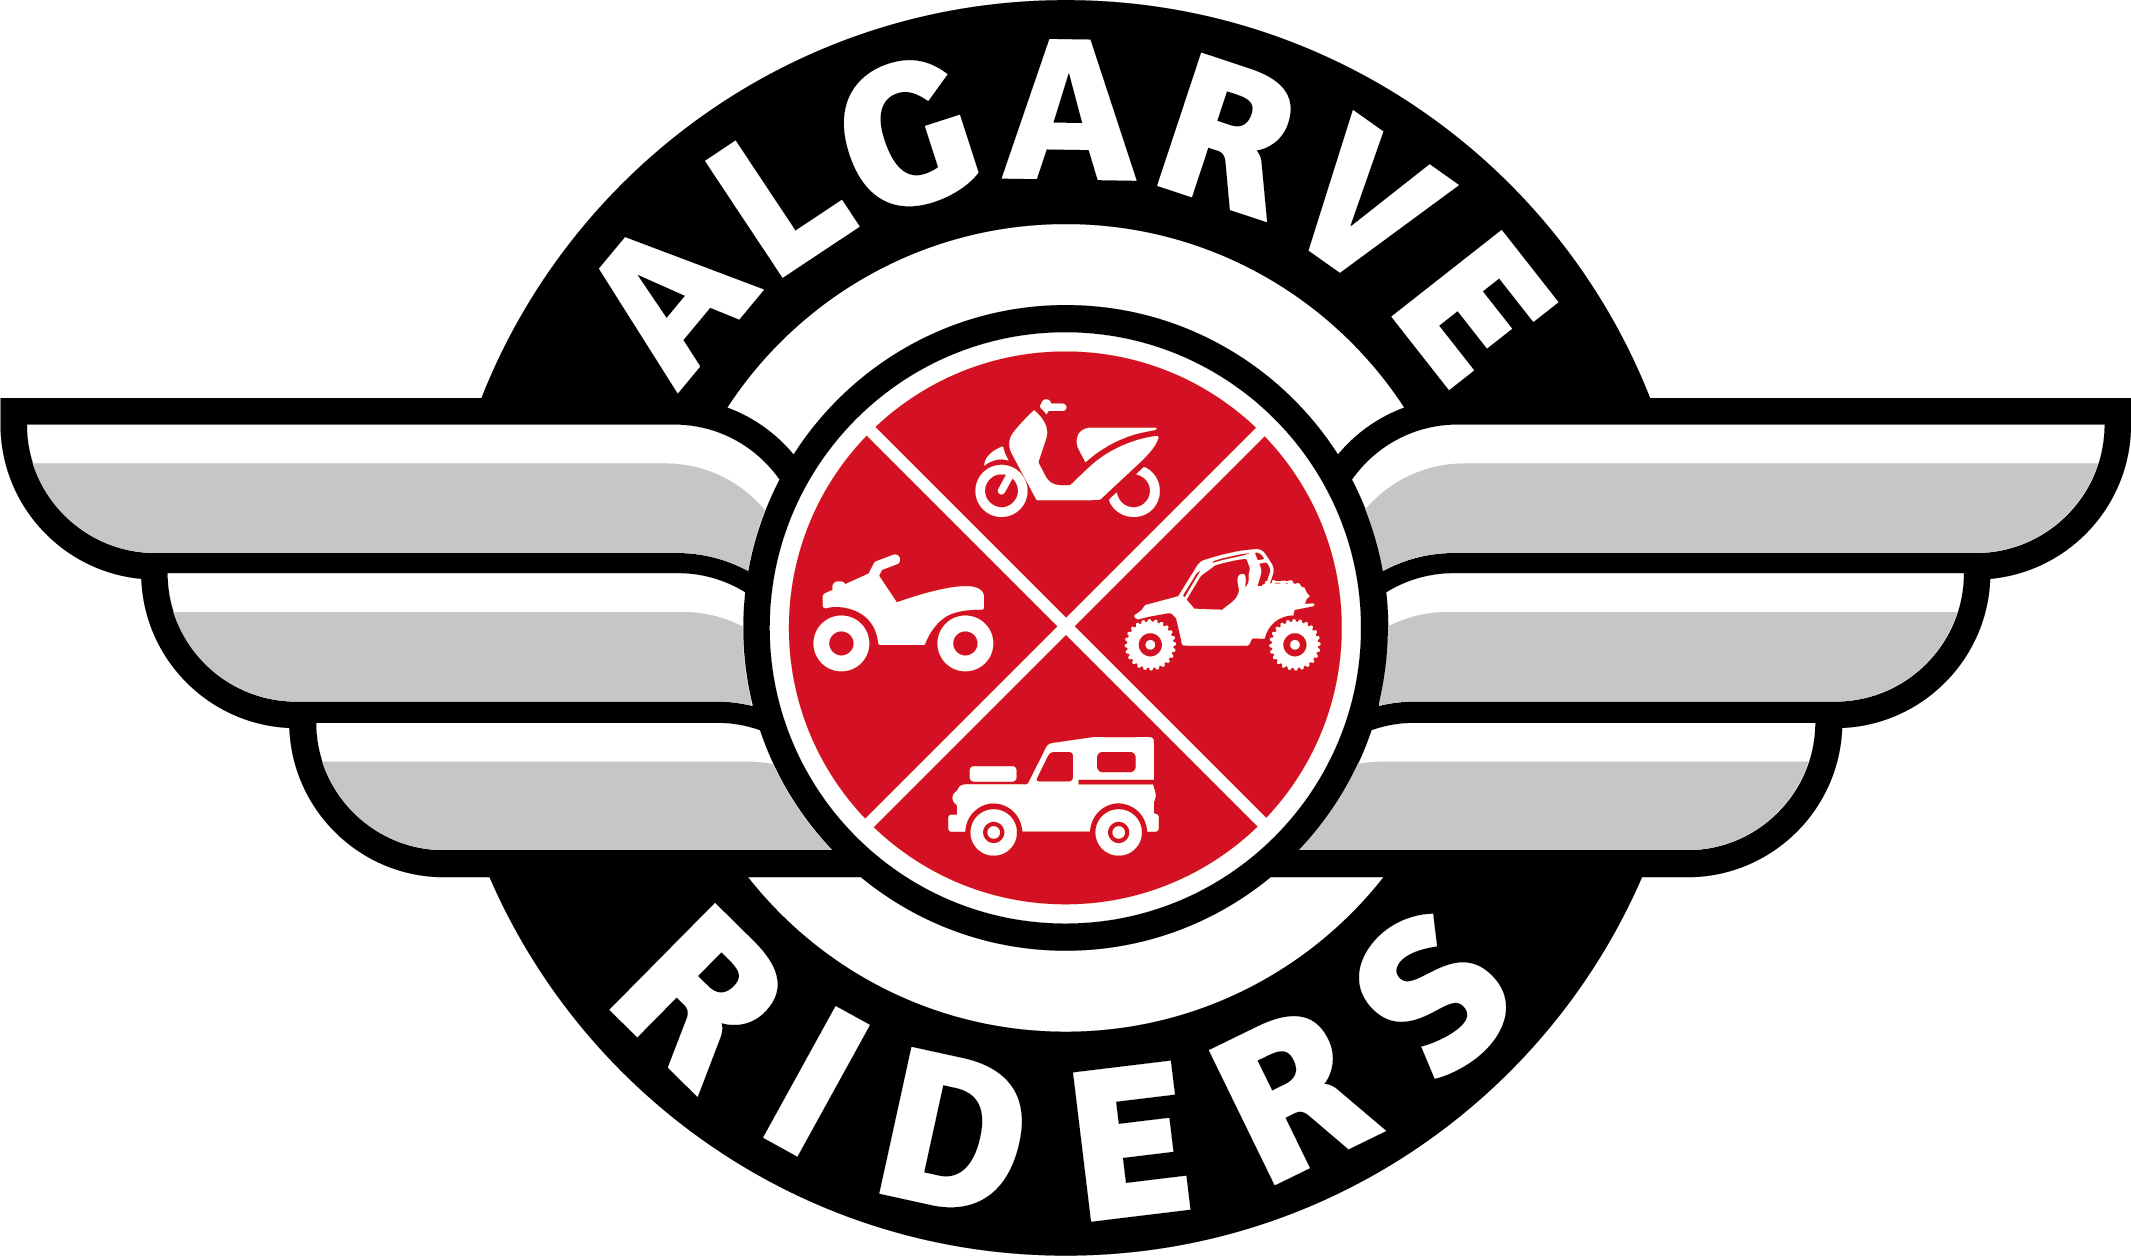 Algarve Riders - Scooters & Tours logo